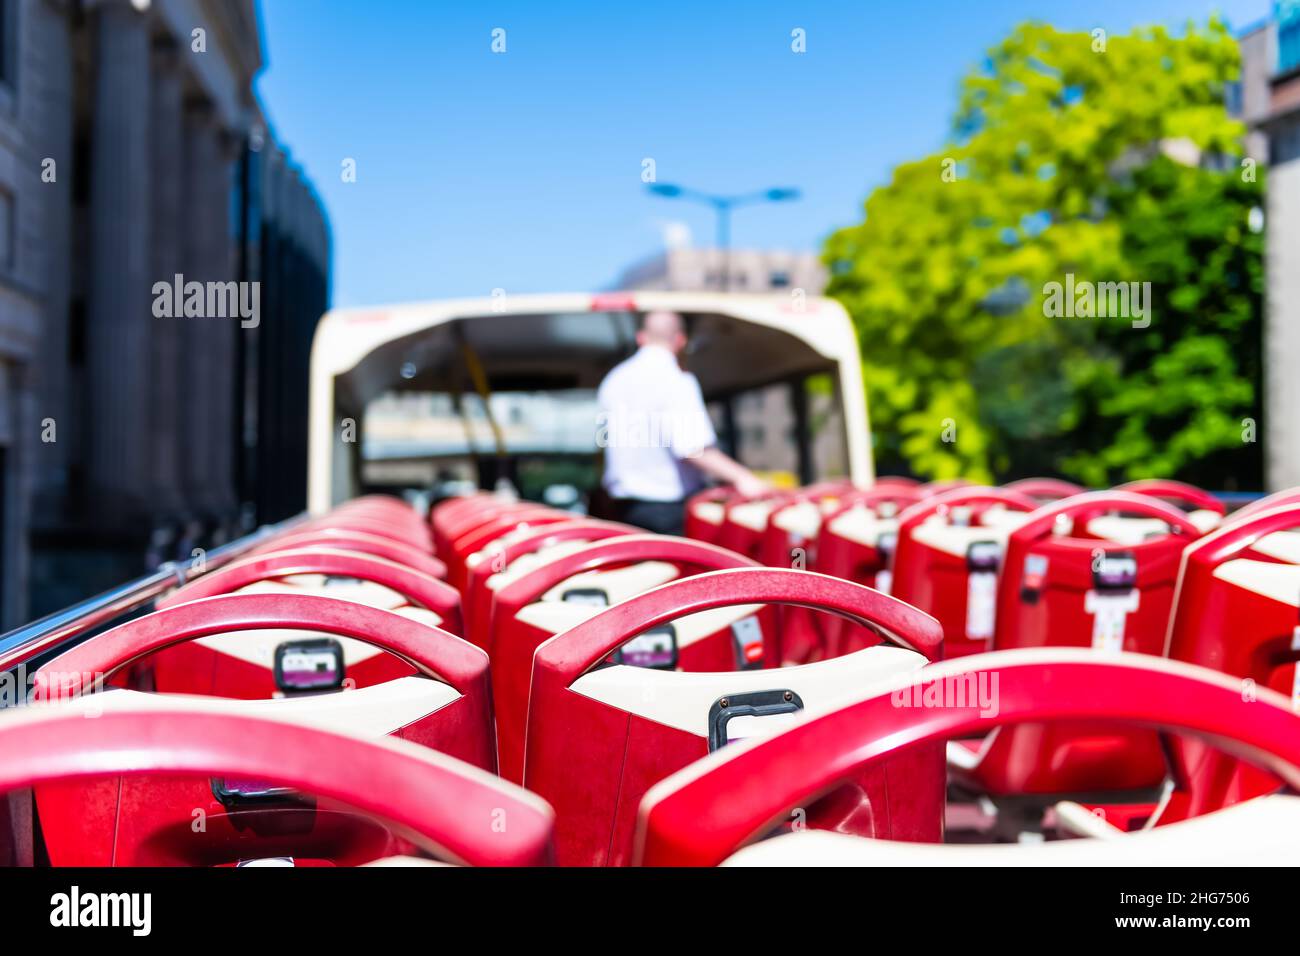 London, UK open top of red double decker tourist bus with guided tour guide riding through streets and empty chairs seats Stock Photo